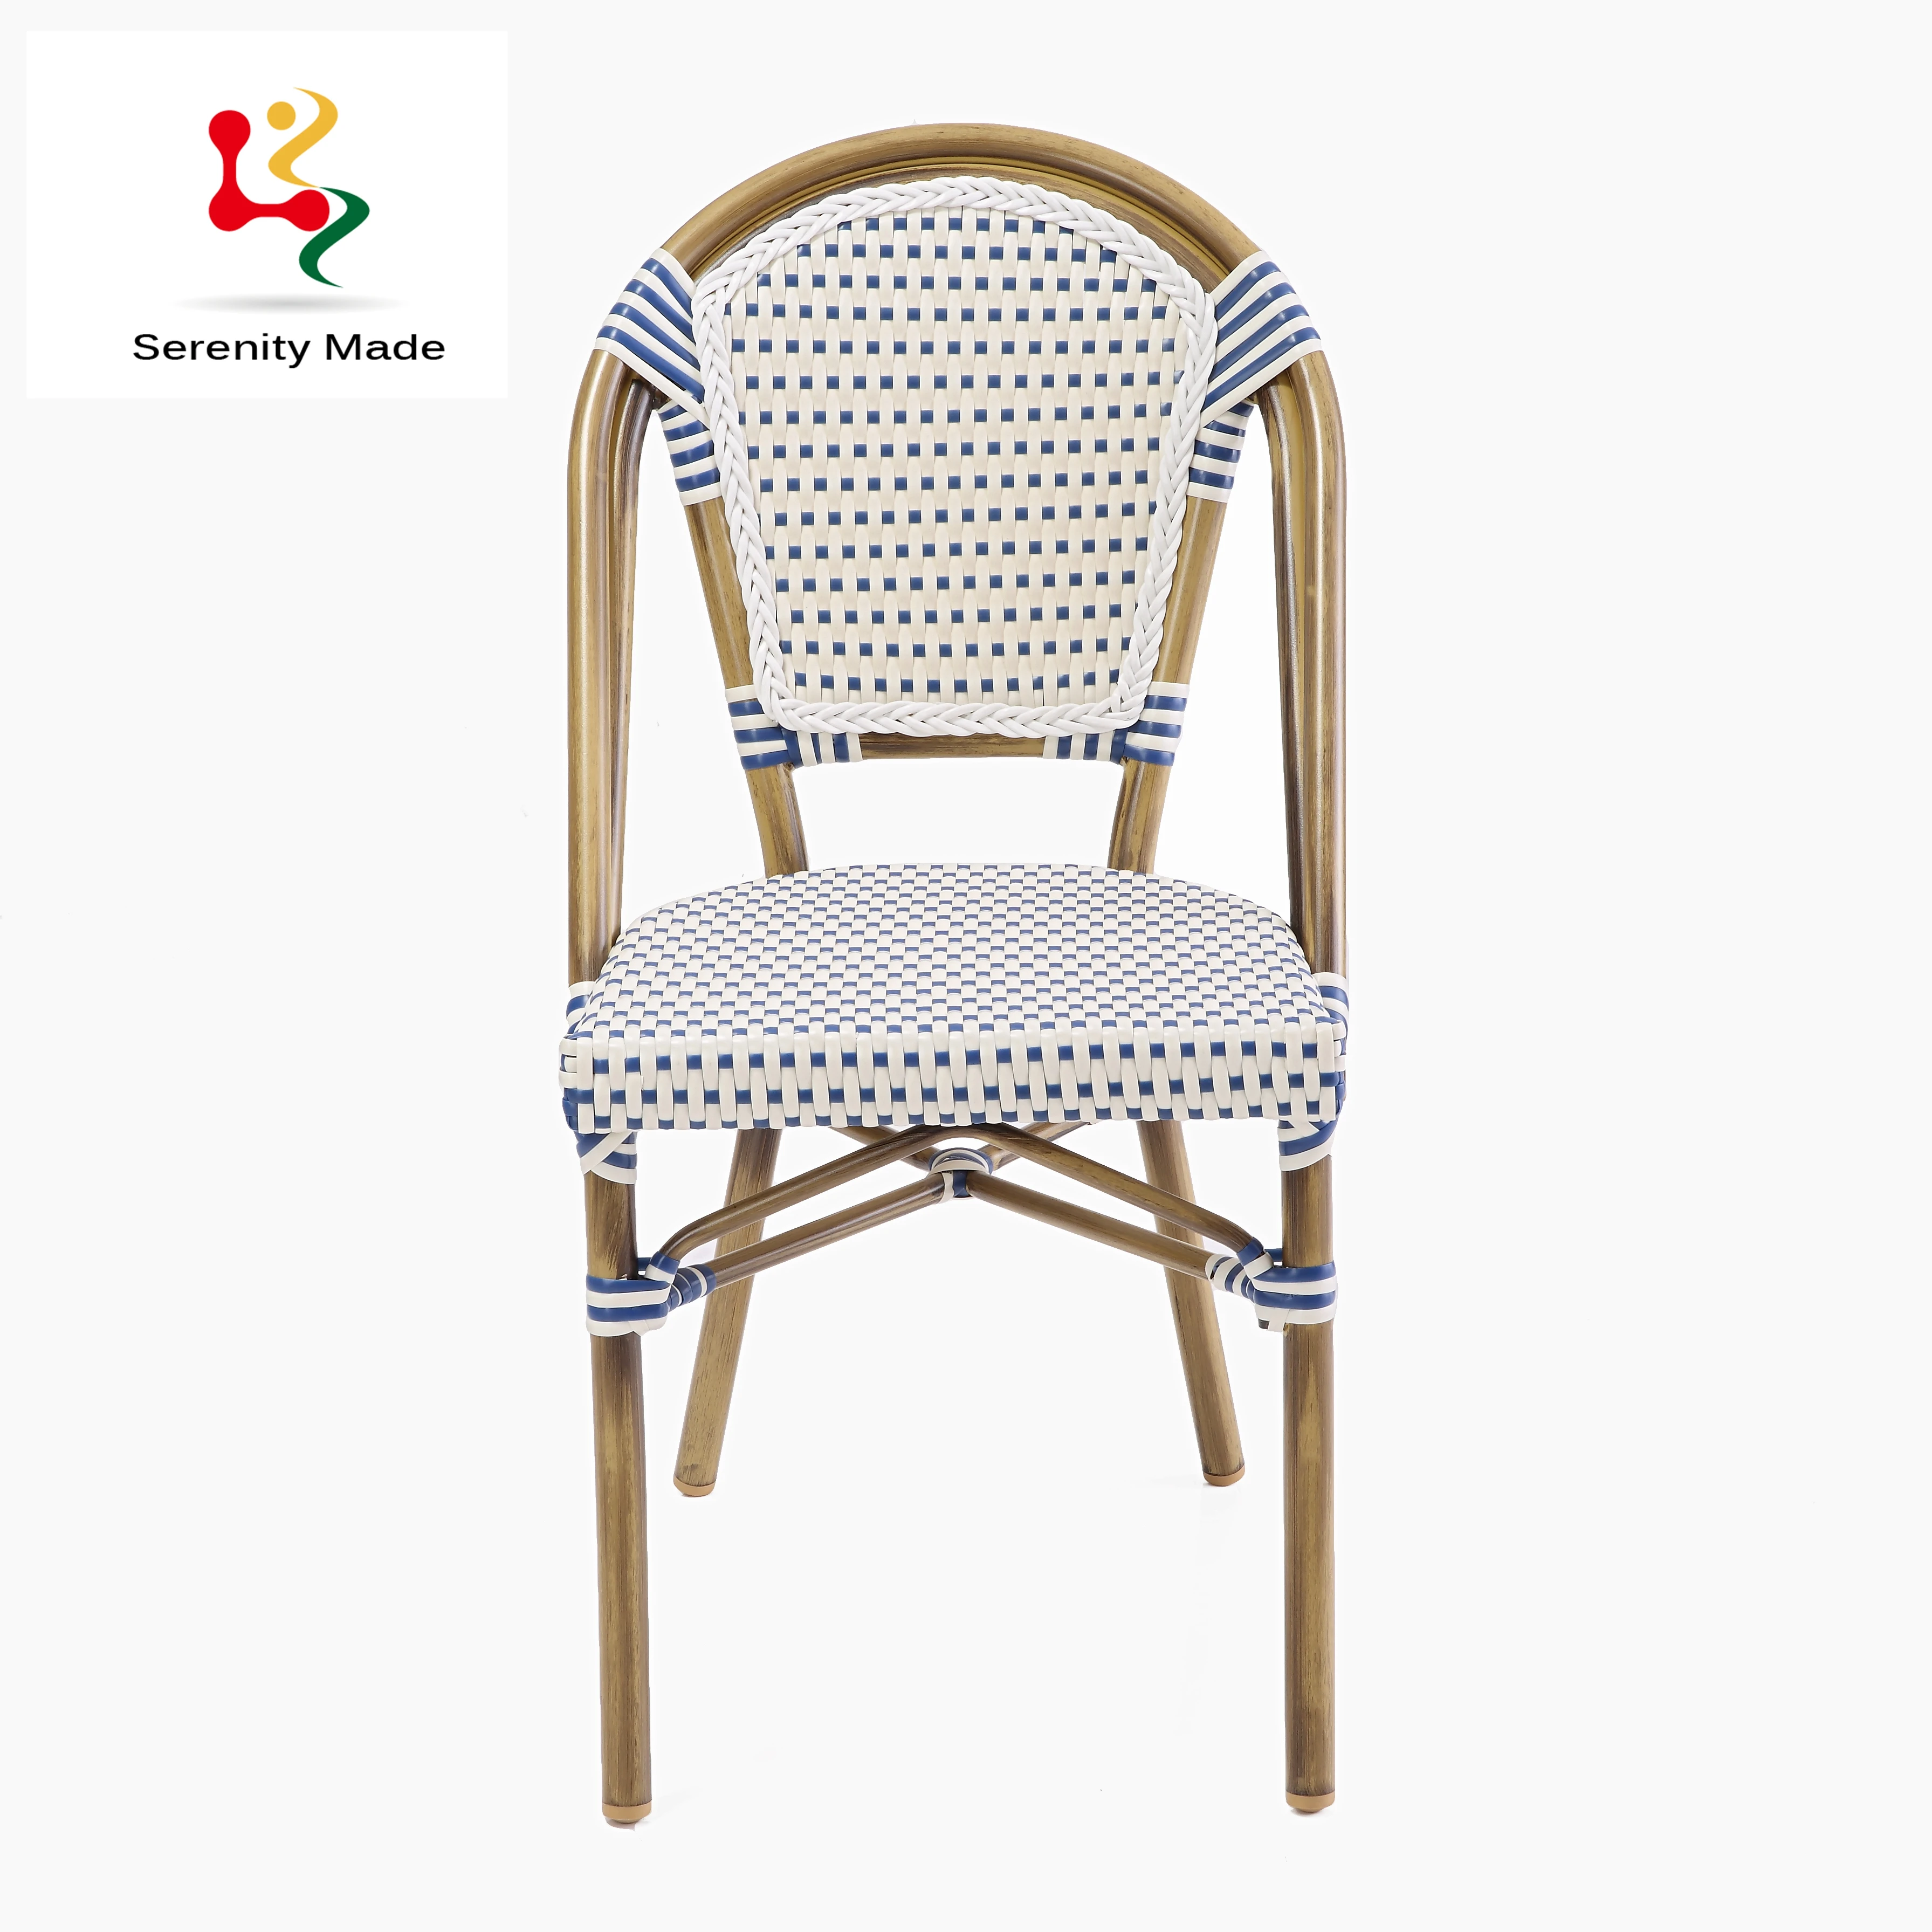 Hot sale outdoor furniture rattan chair for outdoor use